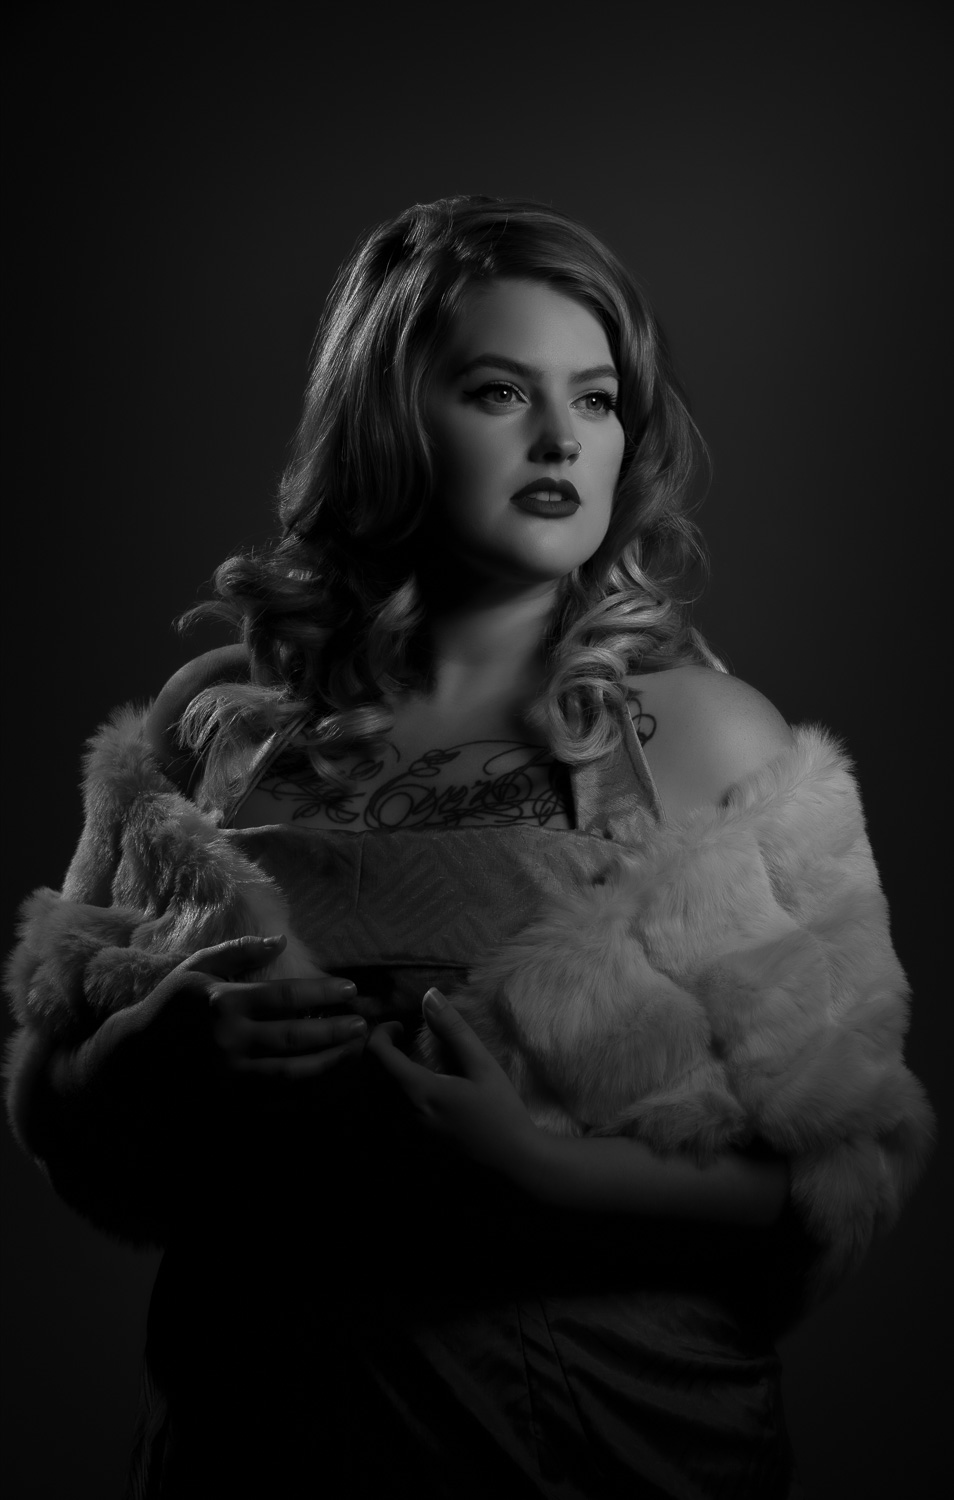 B&W hollywood style female portrait photo, Cowichan Valley, Duncan BC